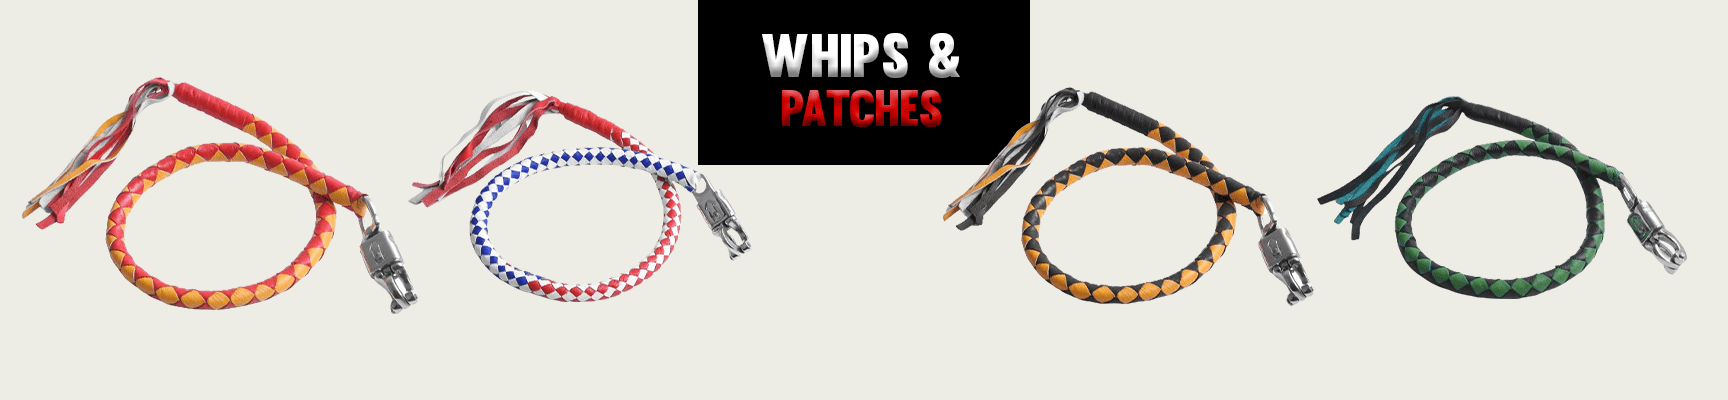 Whips & Patches